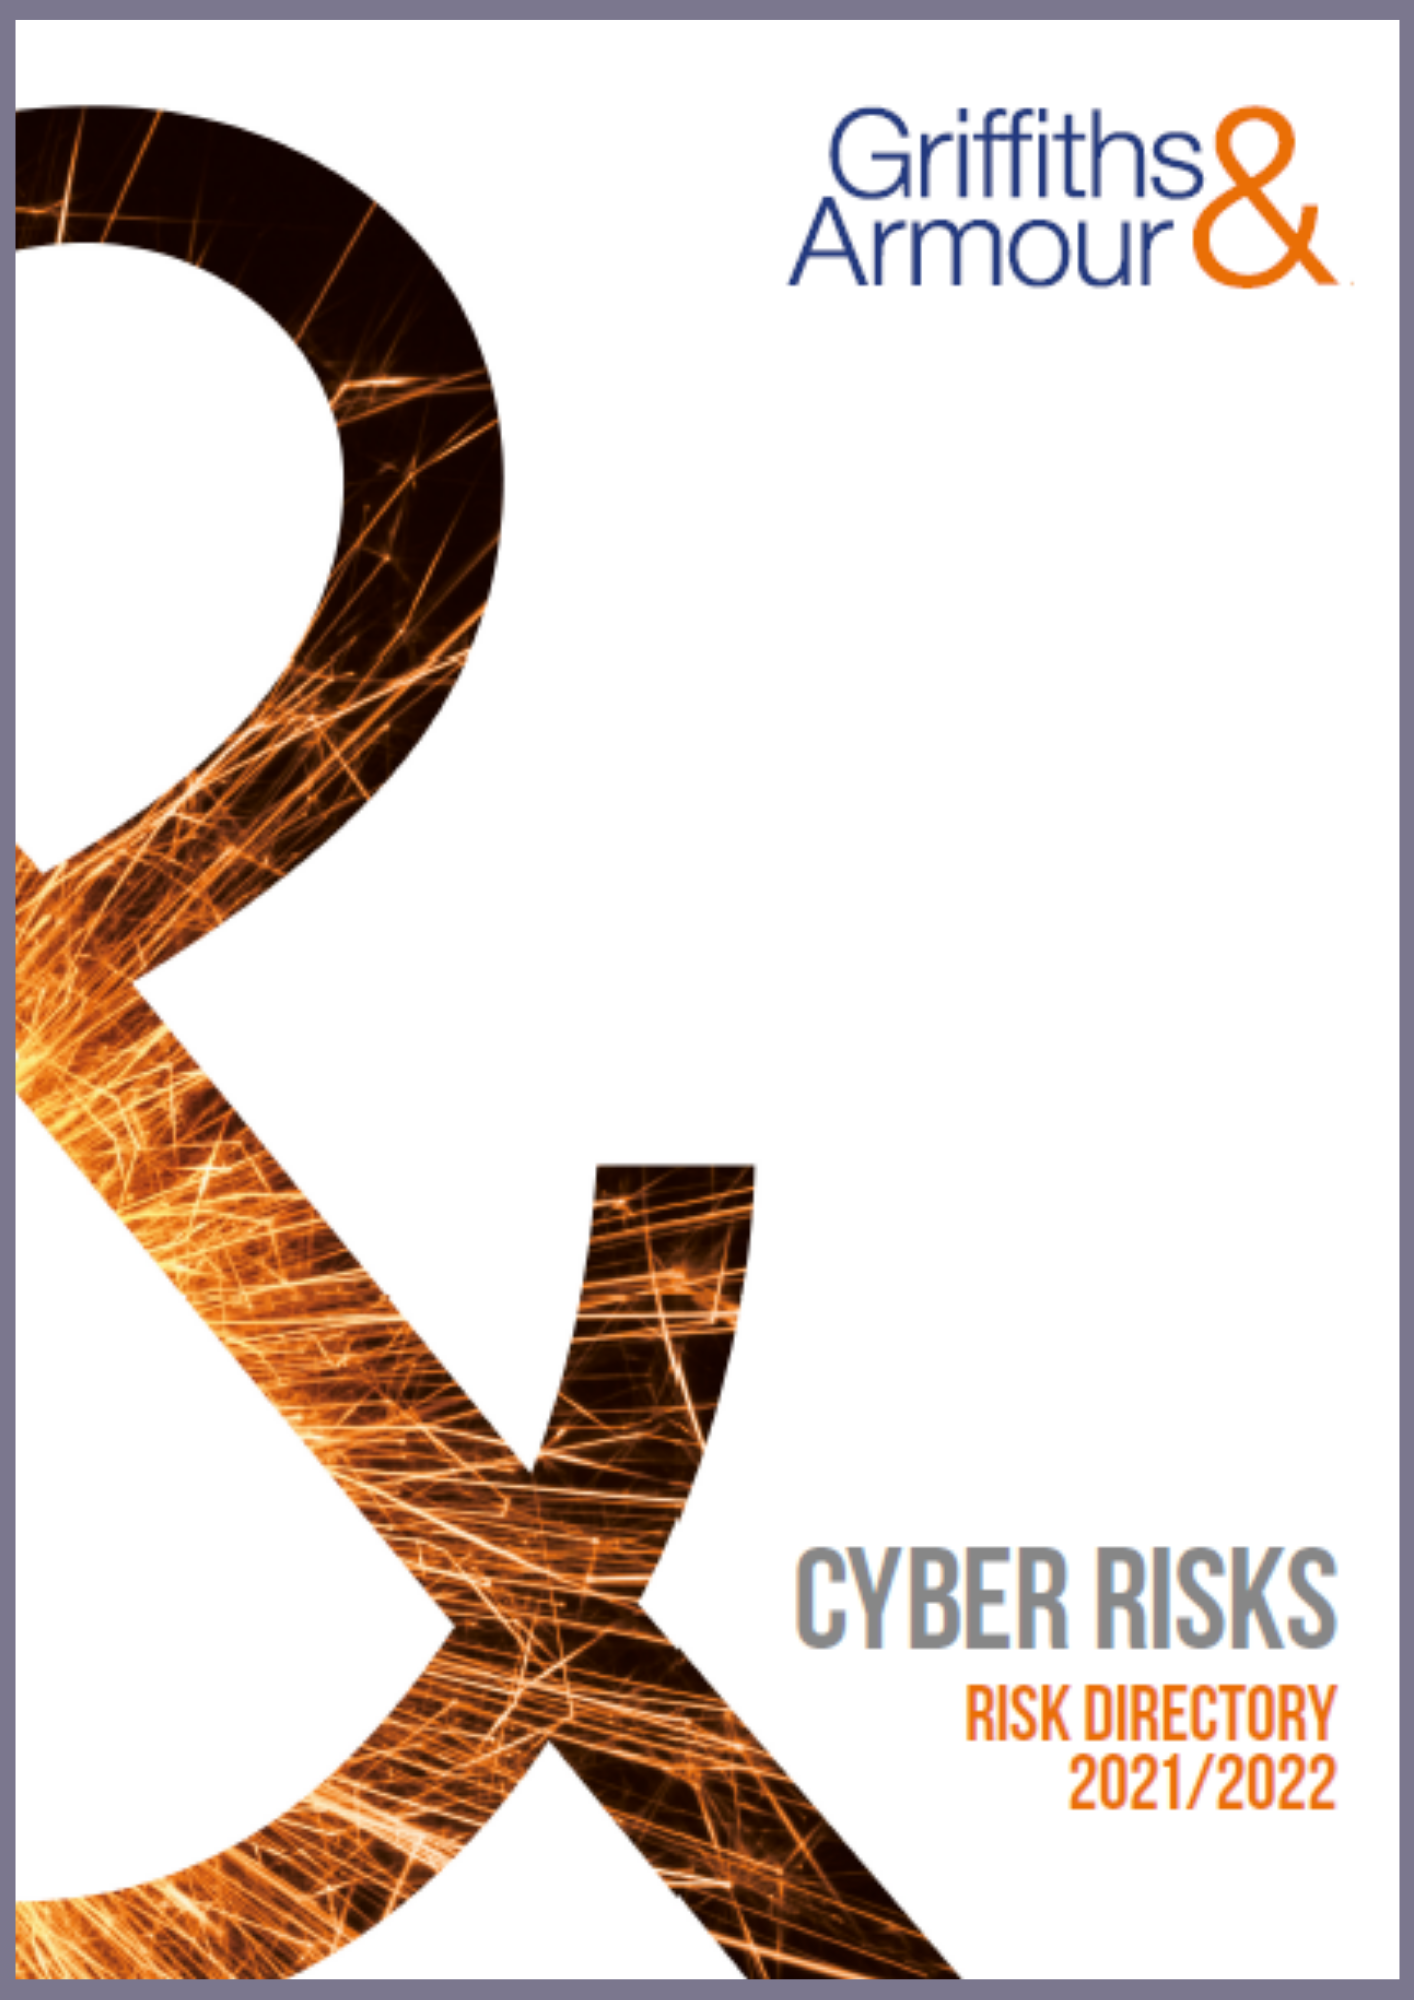 Cyber Risks Directory 2021/22 | Griffiths & Armour